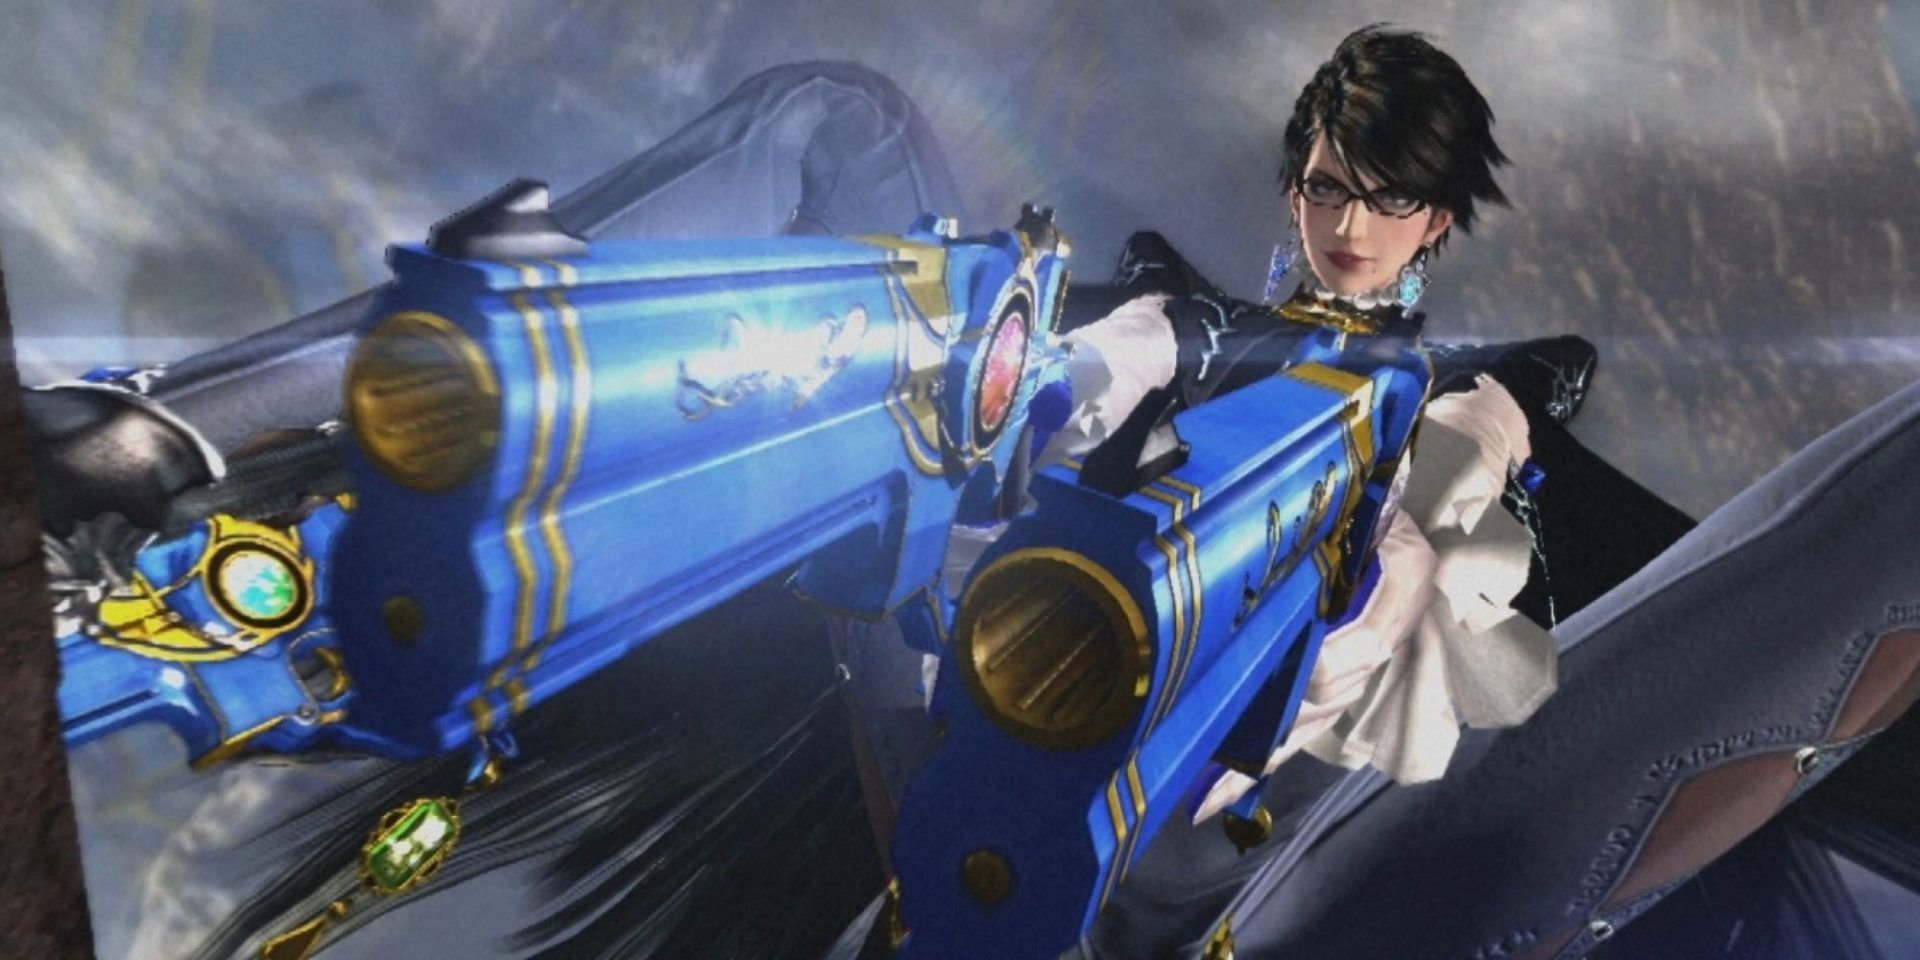 Bayonetta 3 has added a 'nudity censoring mode', says Platinum